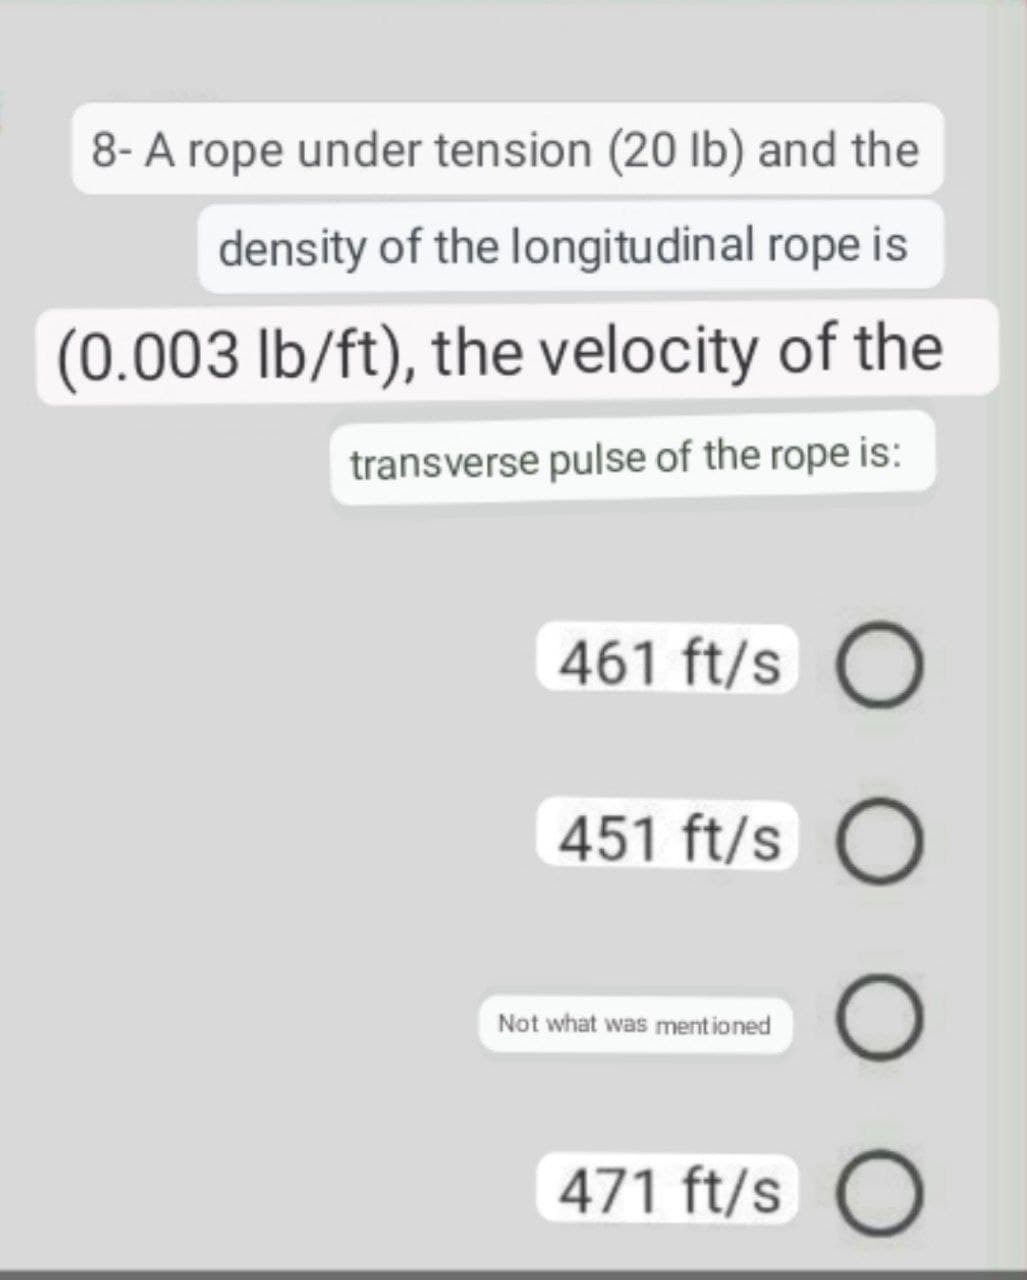 8- A rope under tension (20 lb) and the
density of the longitudinal rope is
(0.003 lb/ft), the velocity of the
transverse pulse of the rope is:
461 ft/s O
451 ft/s O
Not what was mentioned
471 ft/s O
